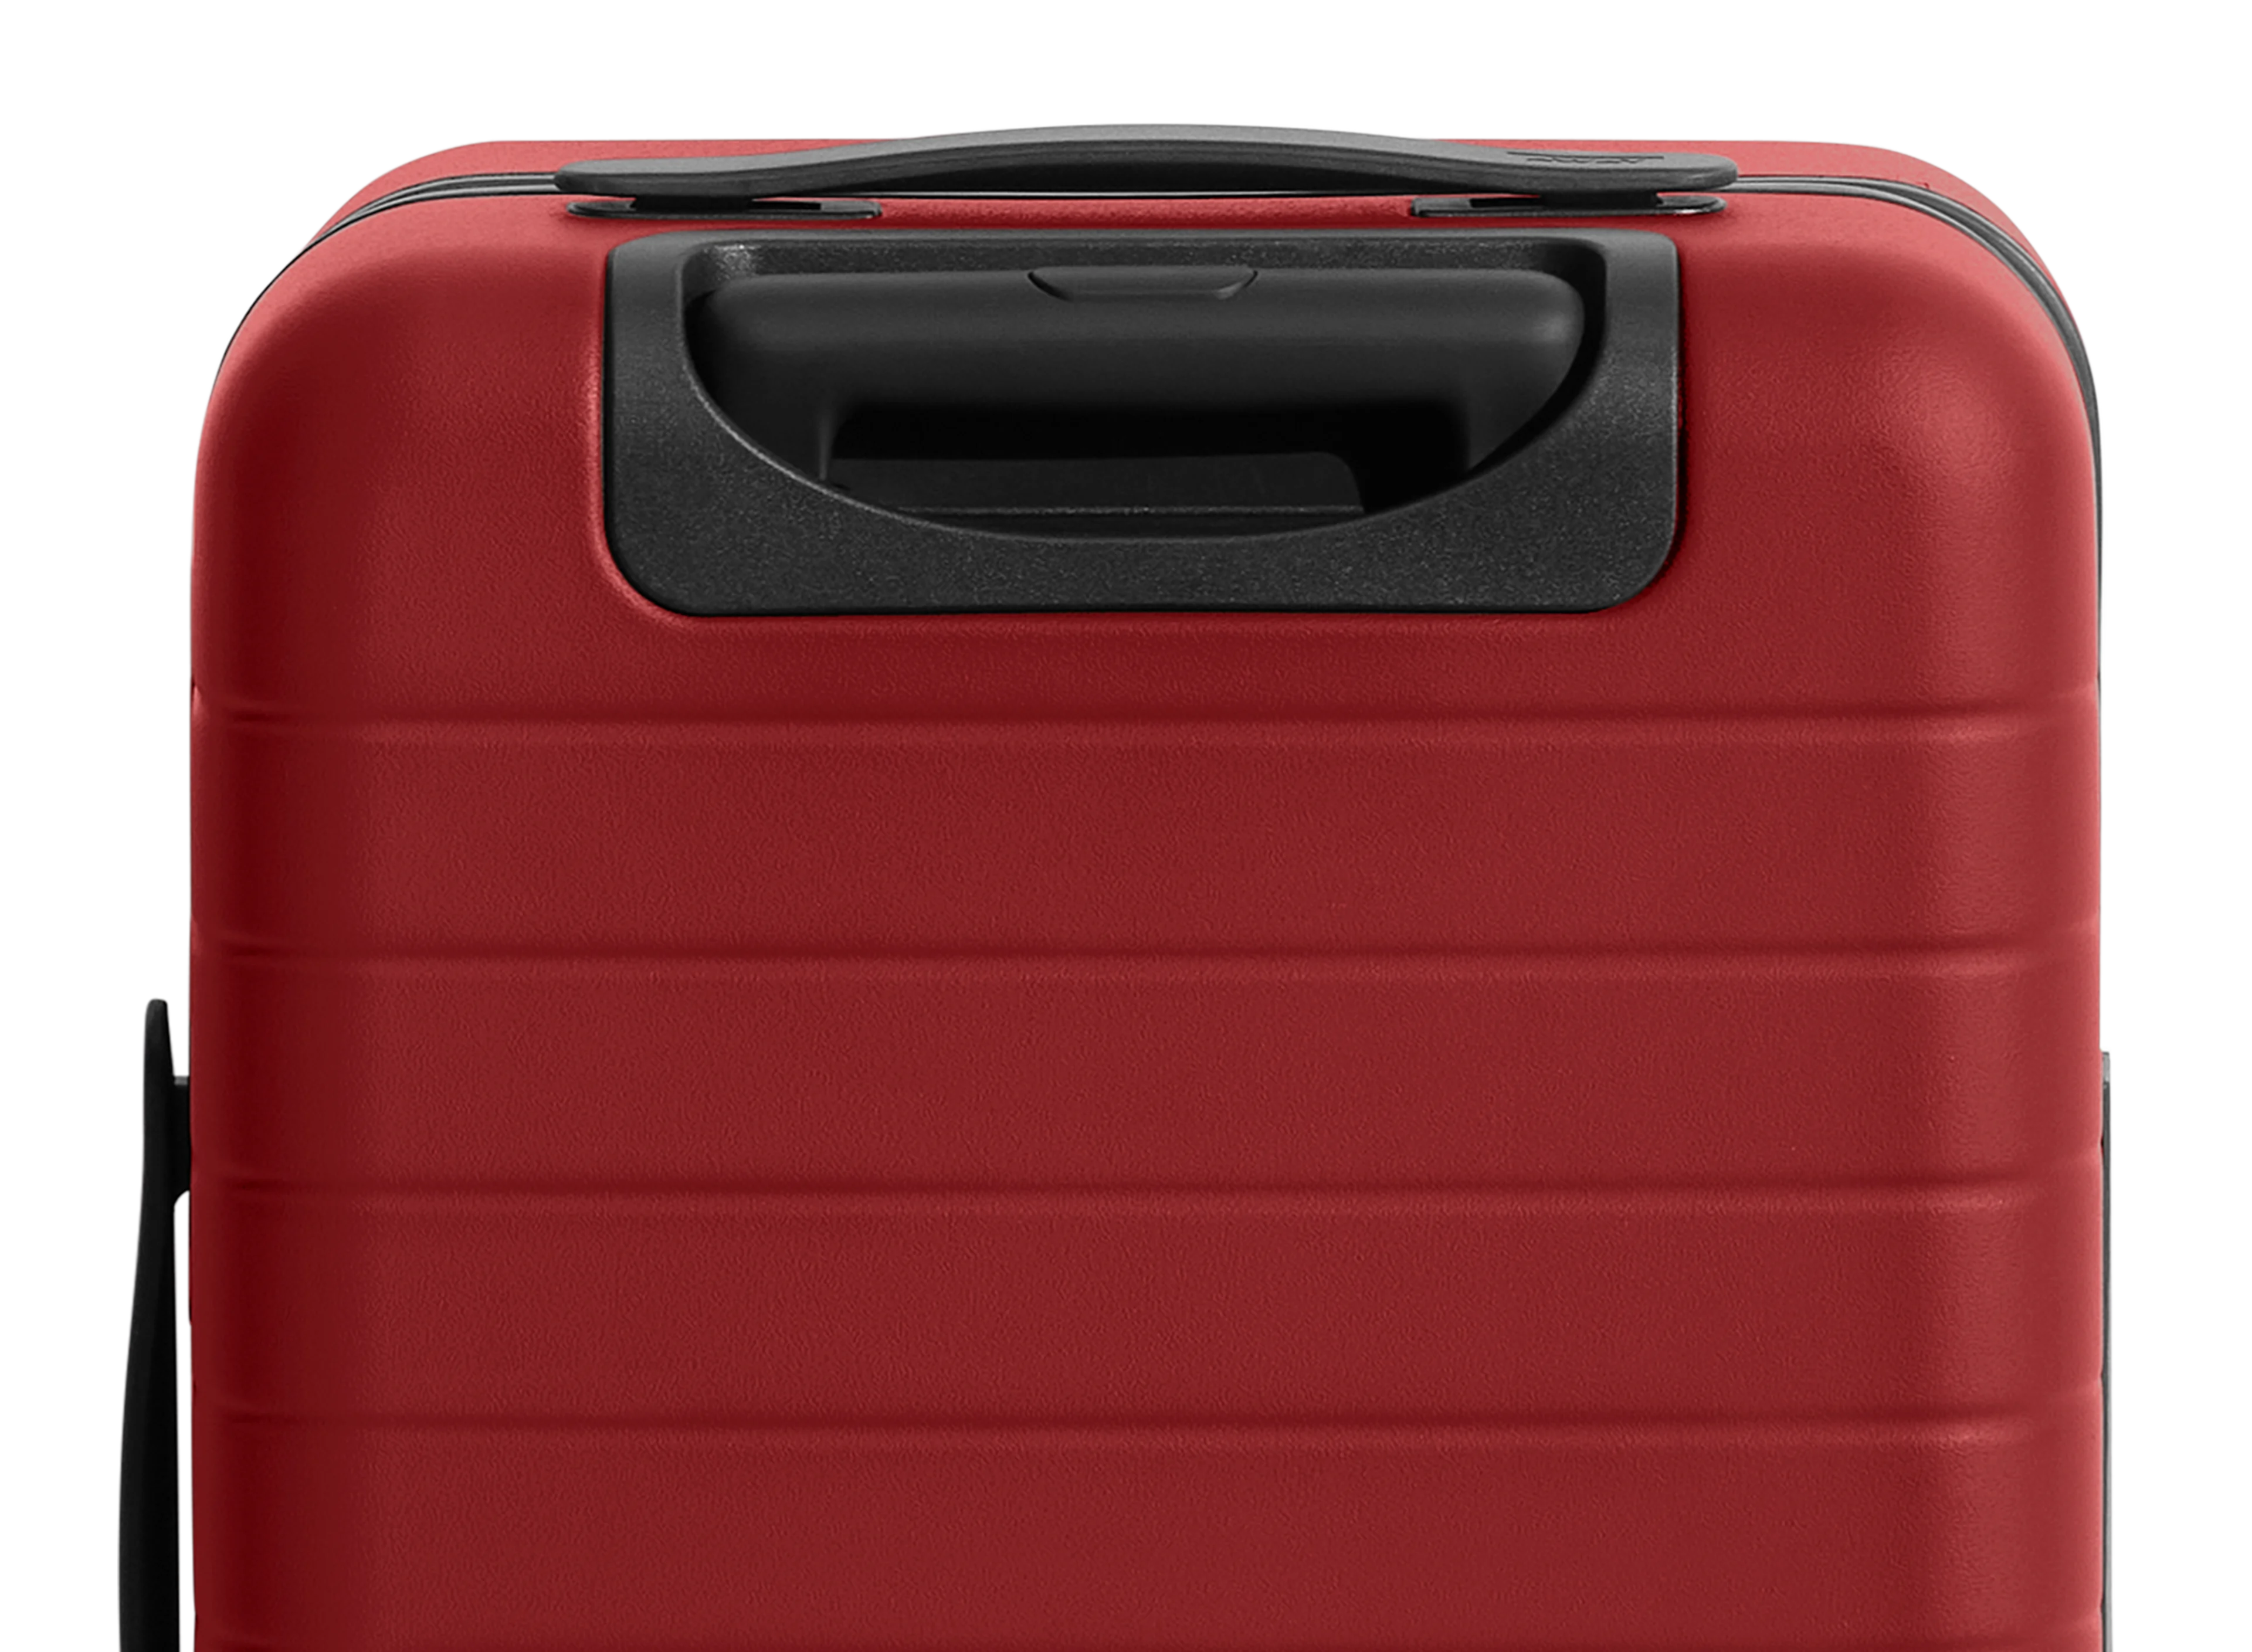 The Carry-On in Tango Red